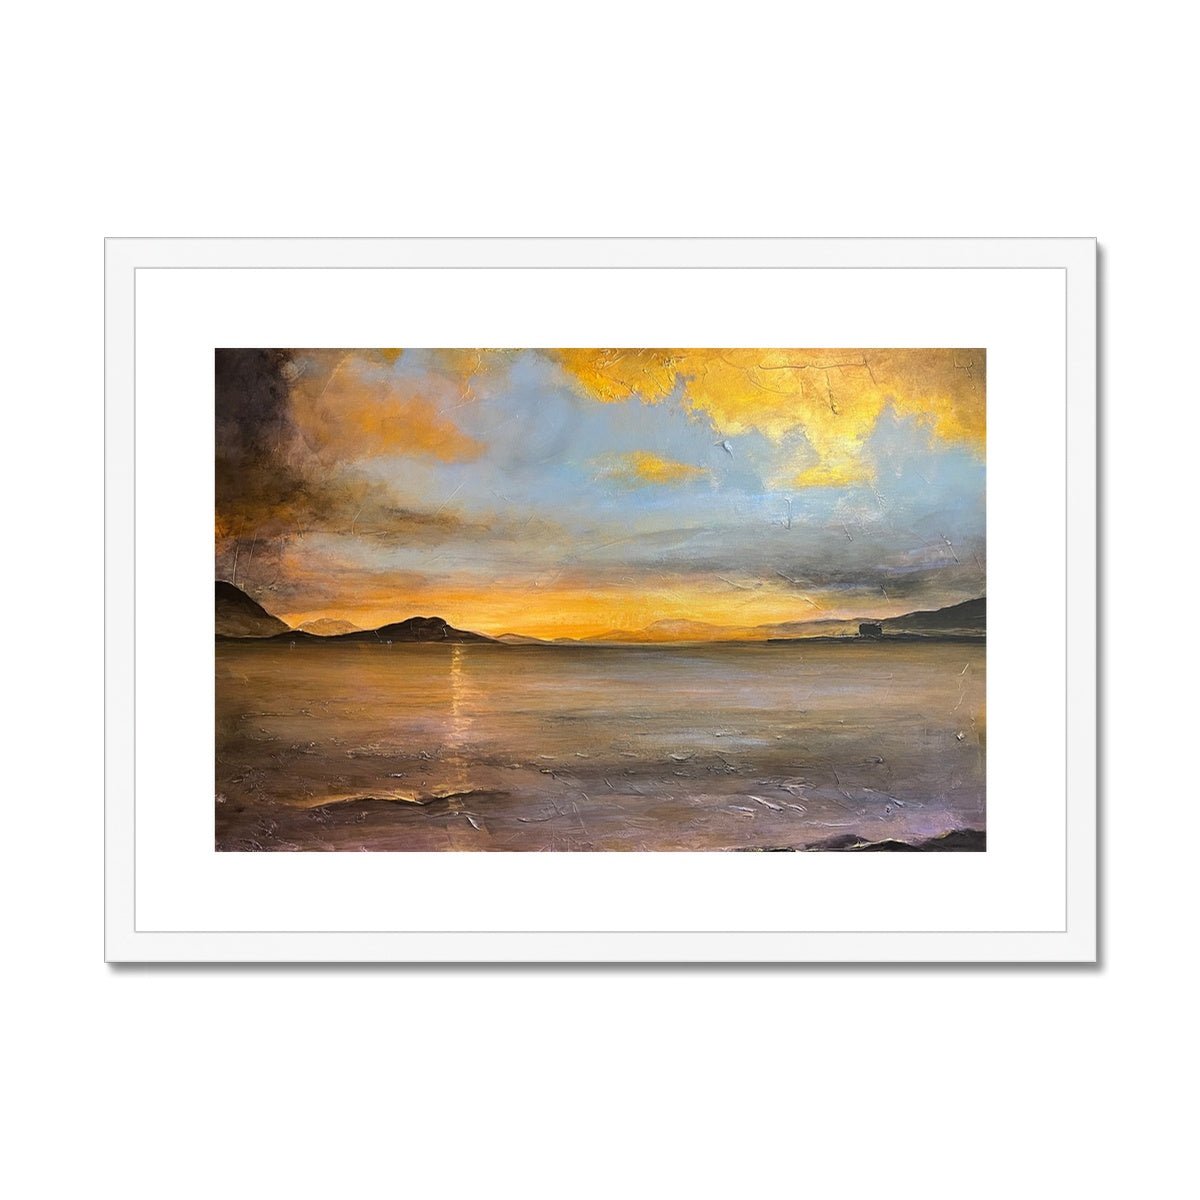 Loch Linnhe Sunset Painting | Framed & Mounted Prints From Scotland-Framed & Mounted Prints-Scottish Lochs & Mountains Art Gallery-A2 Landscape-White Frame-Paintings, Prints, Homeware, Art Gifts From Scotland By Scottish Artist Kevin Hunter